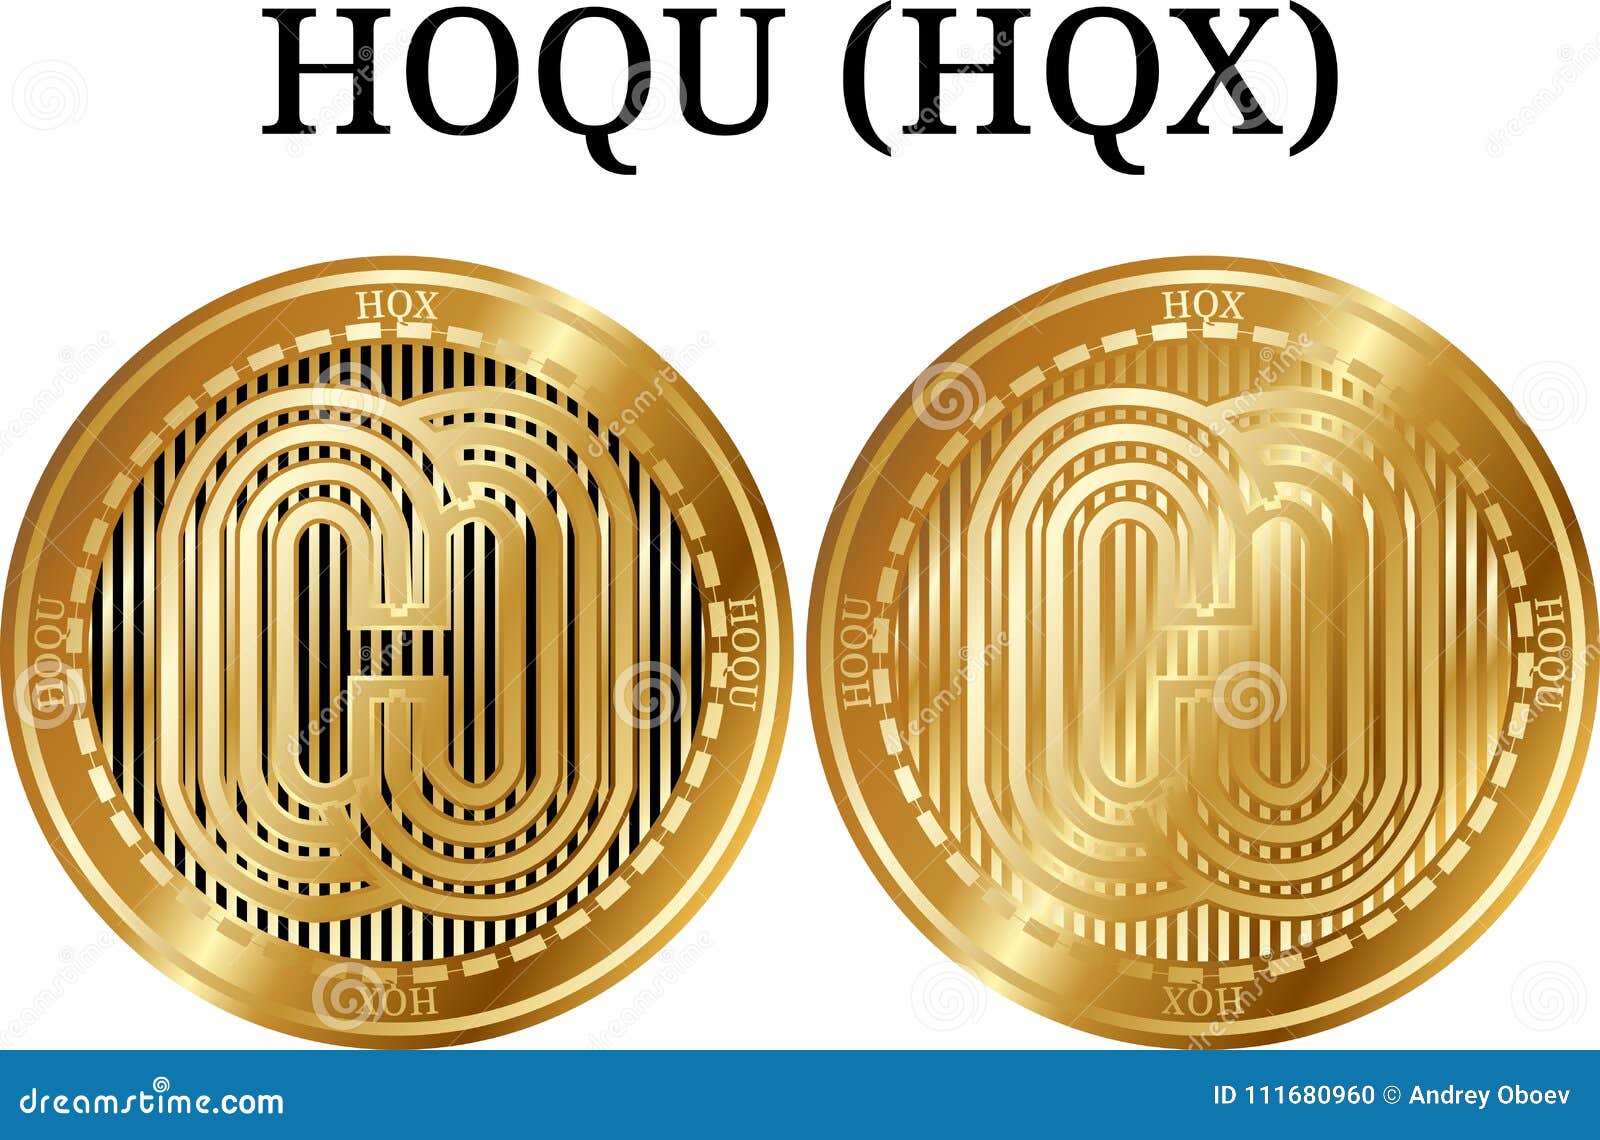 hqx cryptocurrency